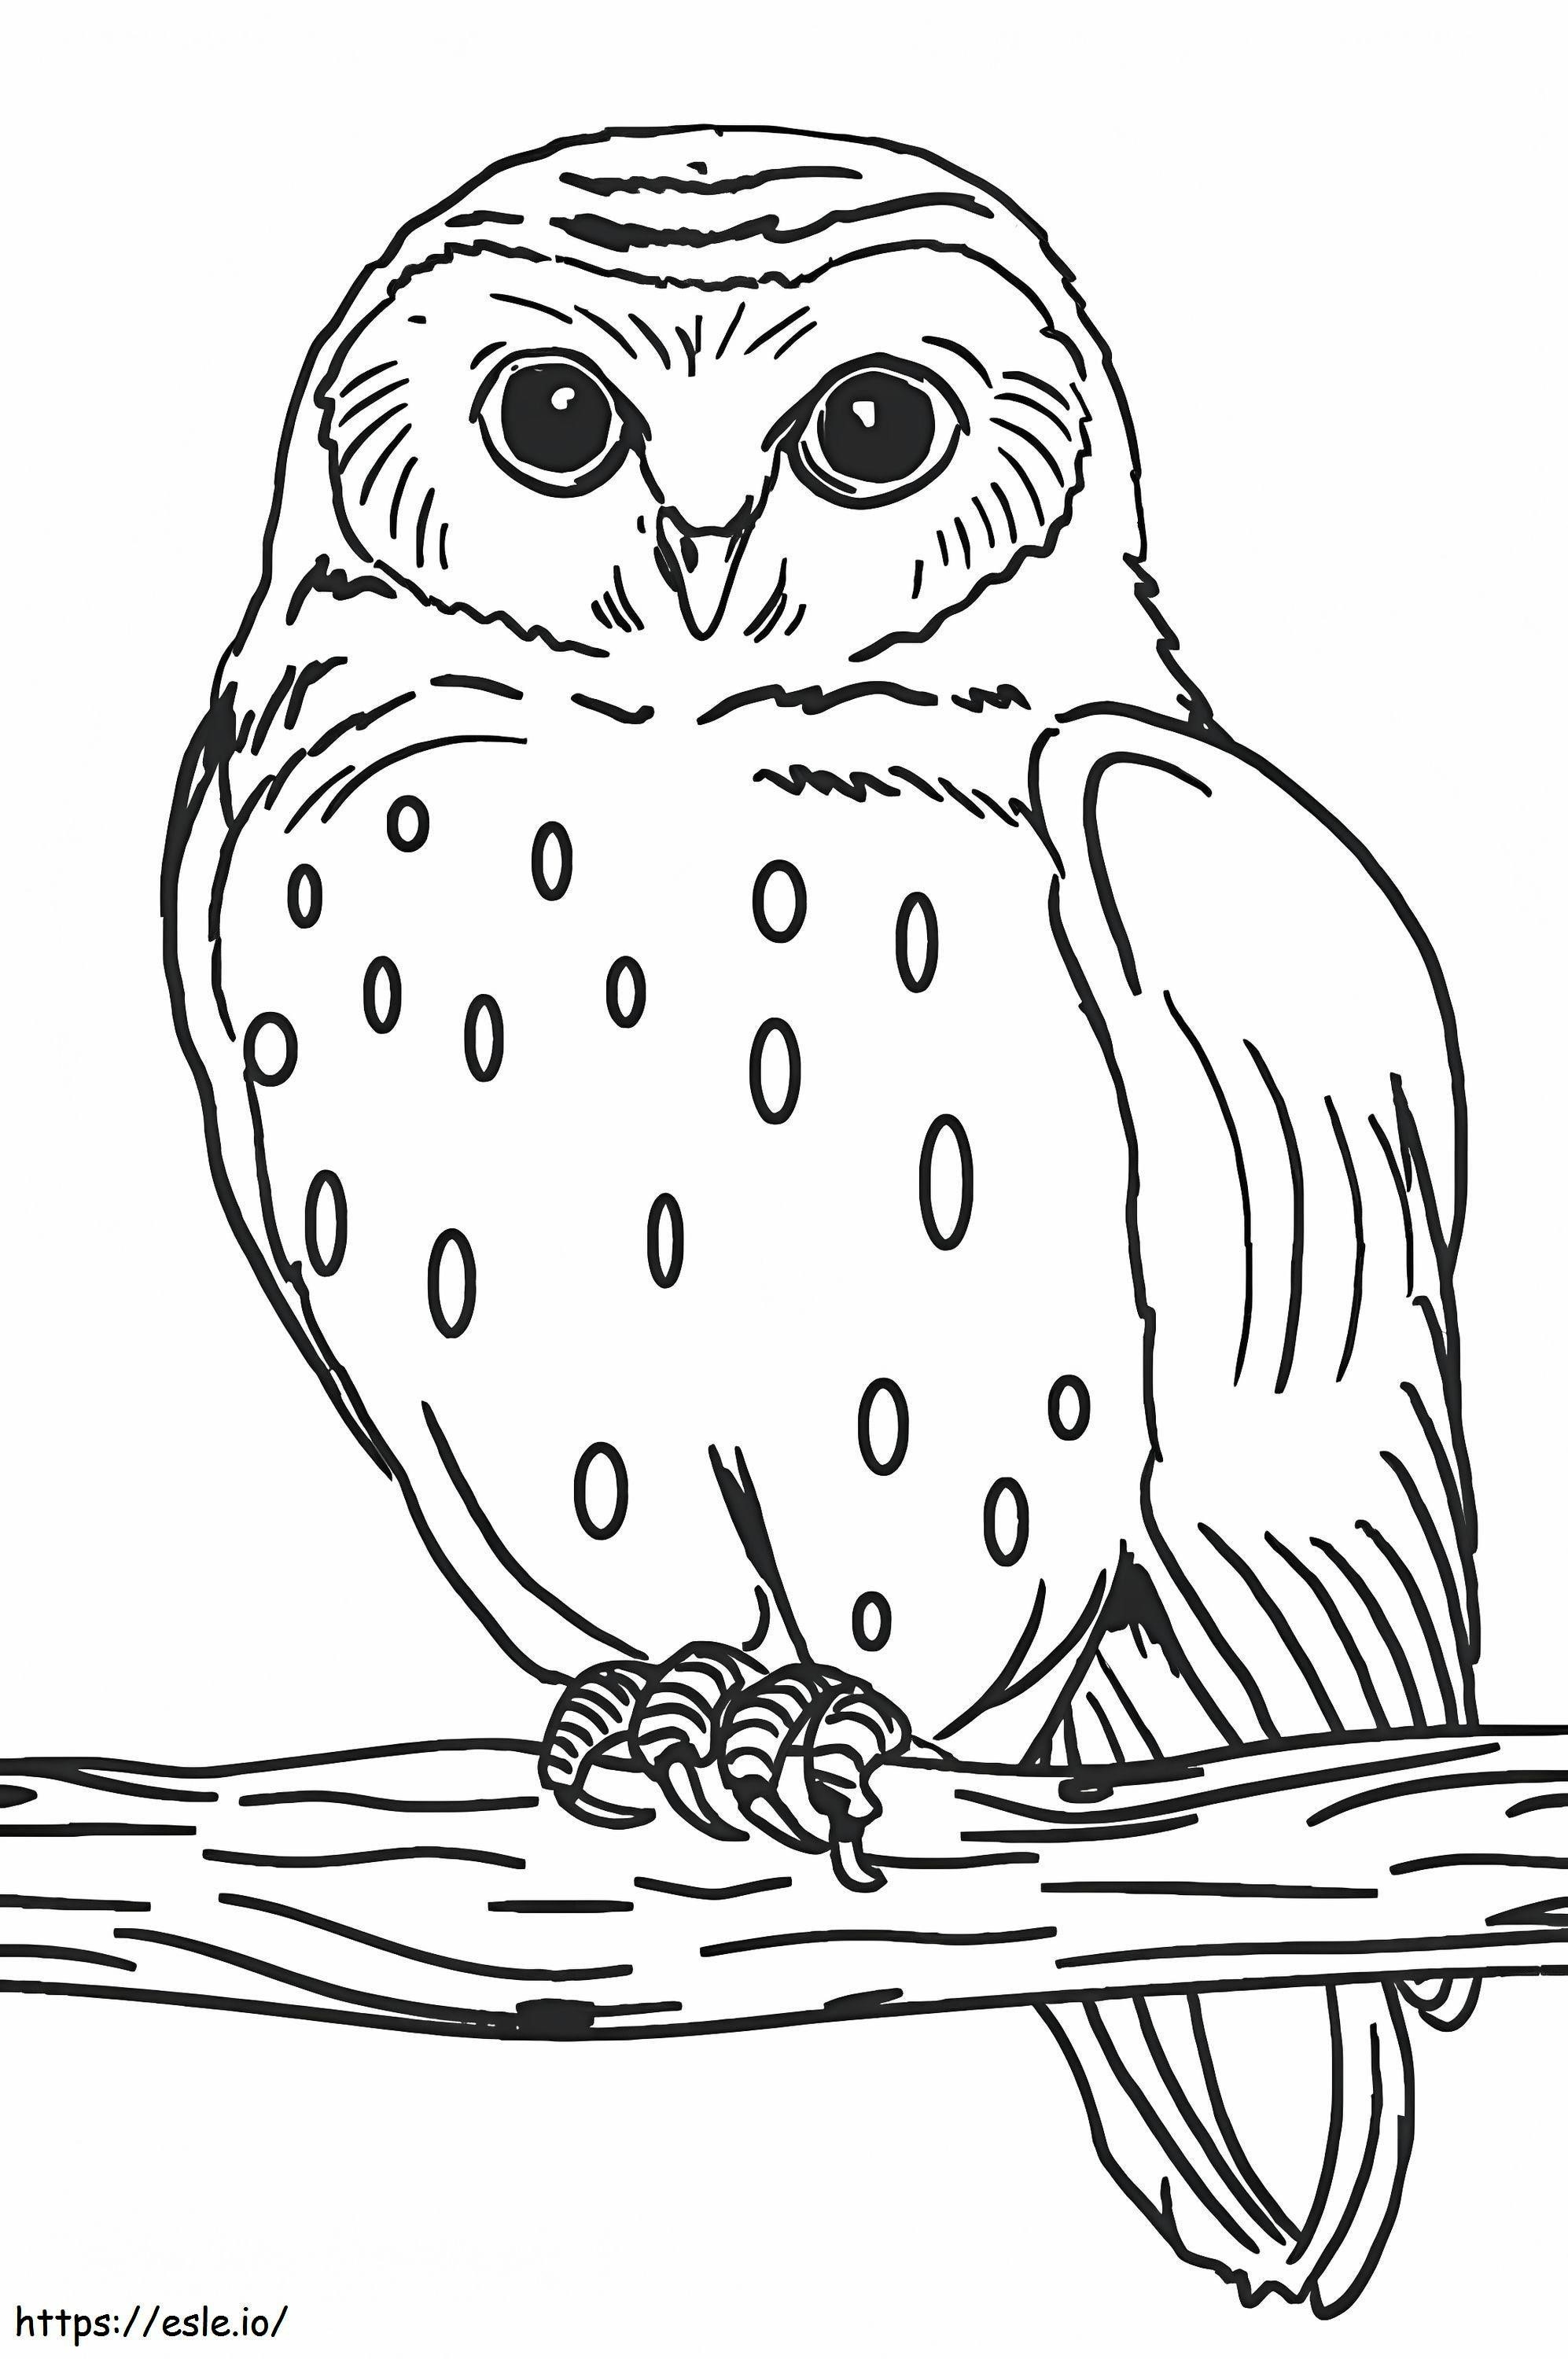 Good Owl coloring page